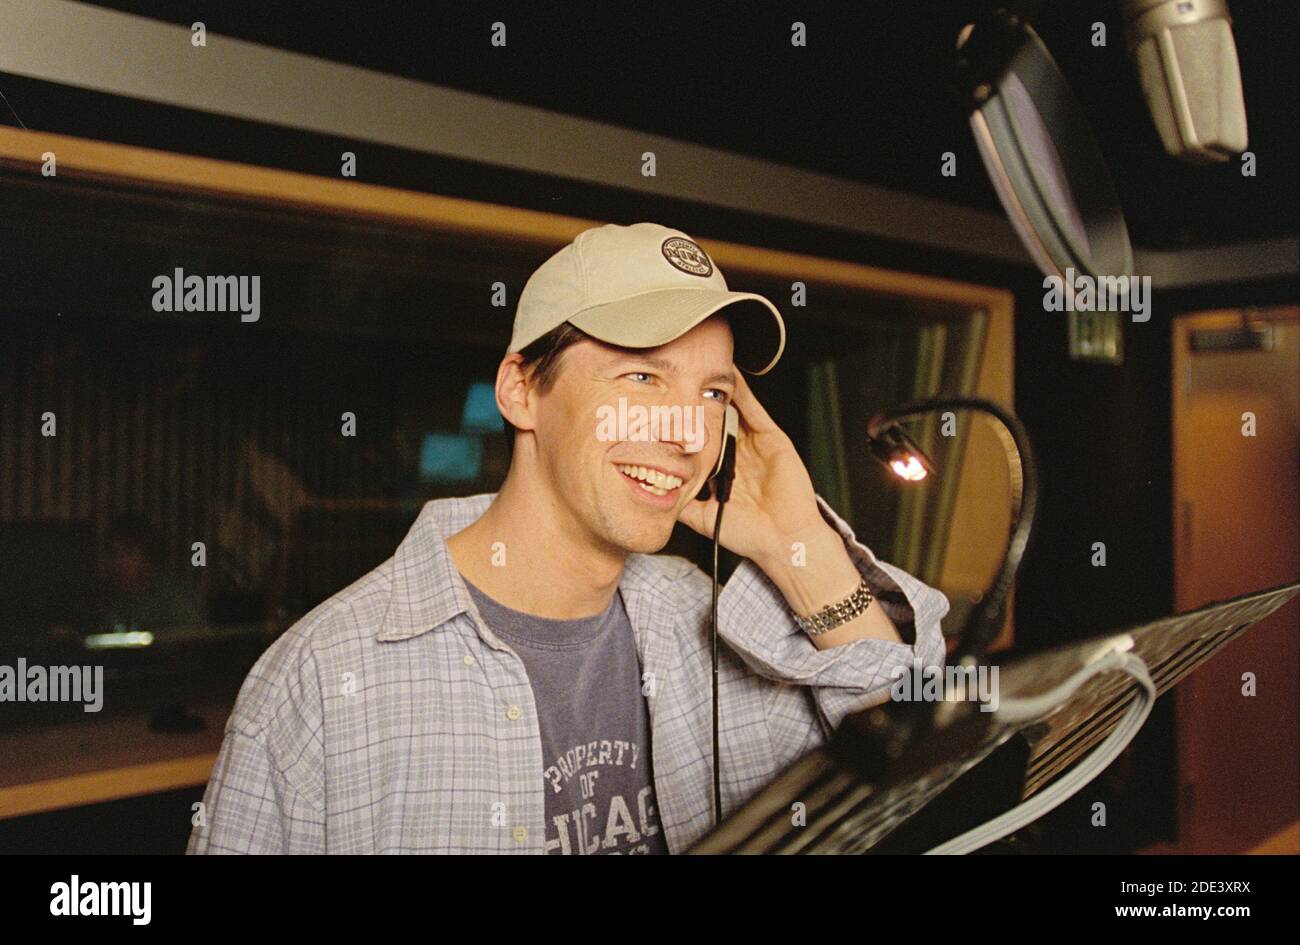 Sean Hayes, 'The Cat in the Hat' (2003) Photo credit: Melinda sue Gordon/Universal/The Hollywood Archive / file Reference N. 34078-0520FSTHA Foto Stock